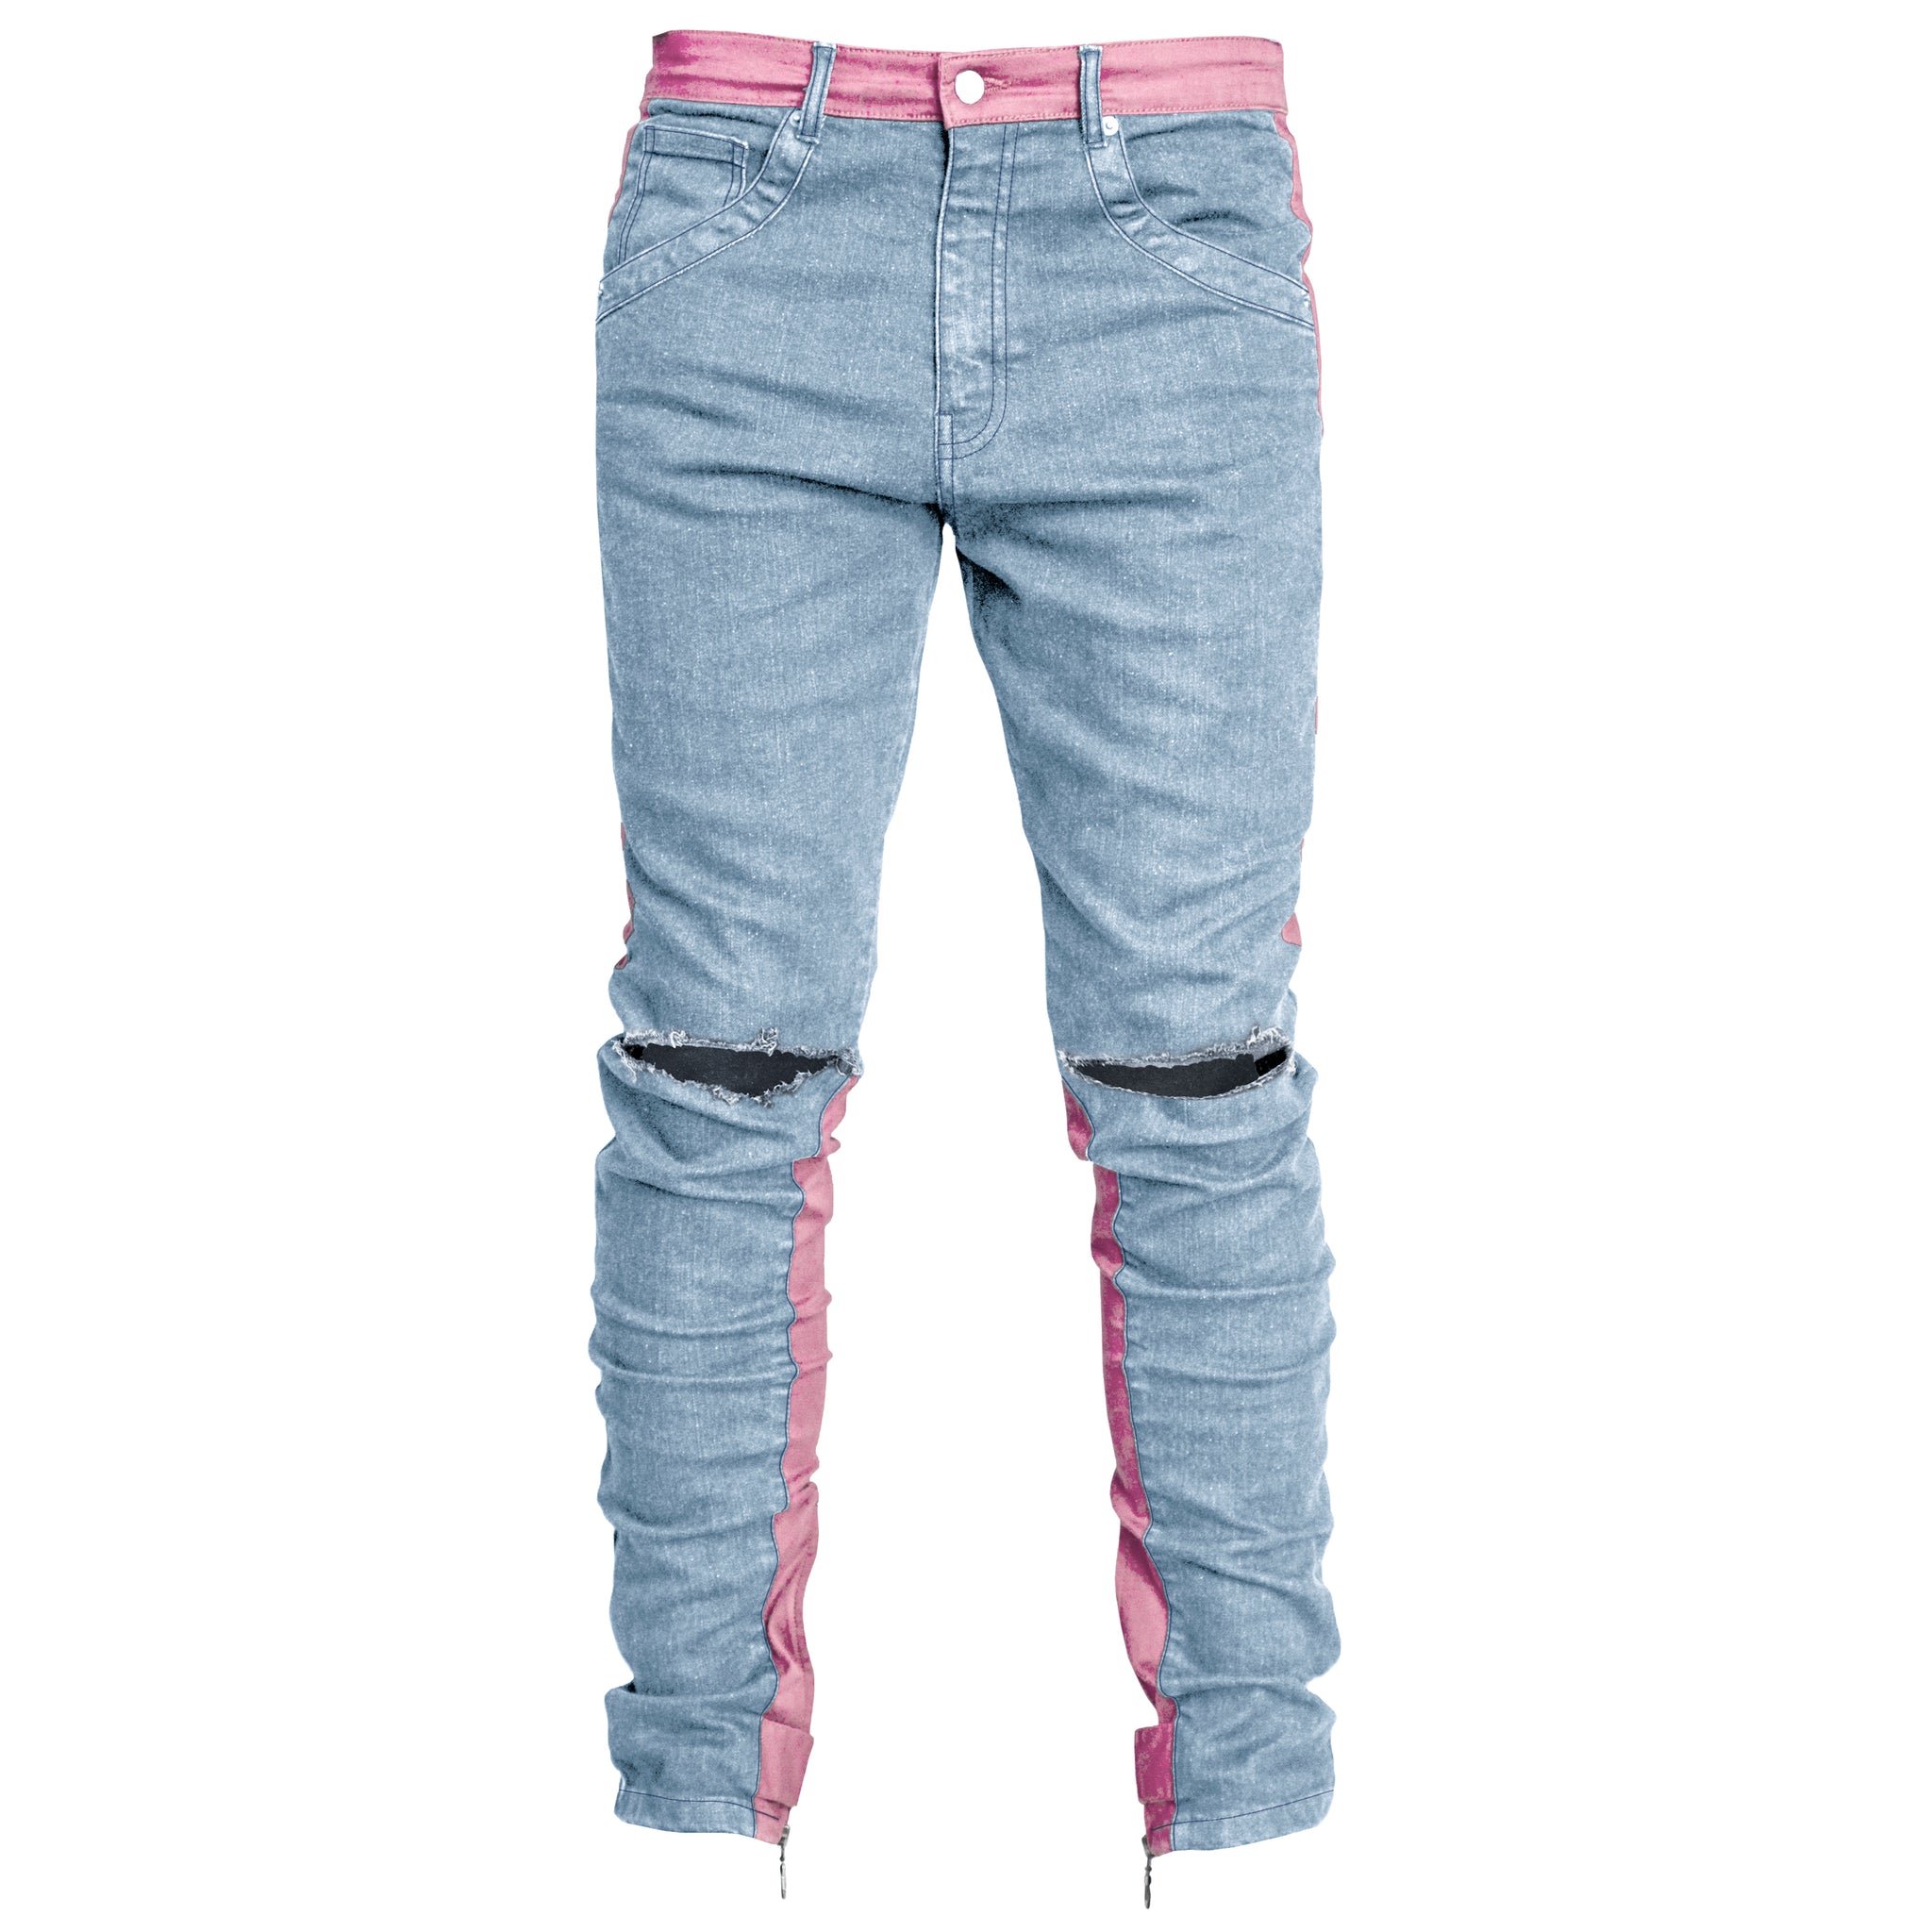 Spear Ankle Zip Jeans : Faded Blue/Pink